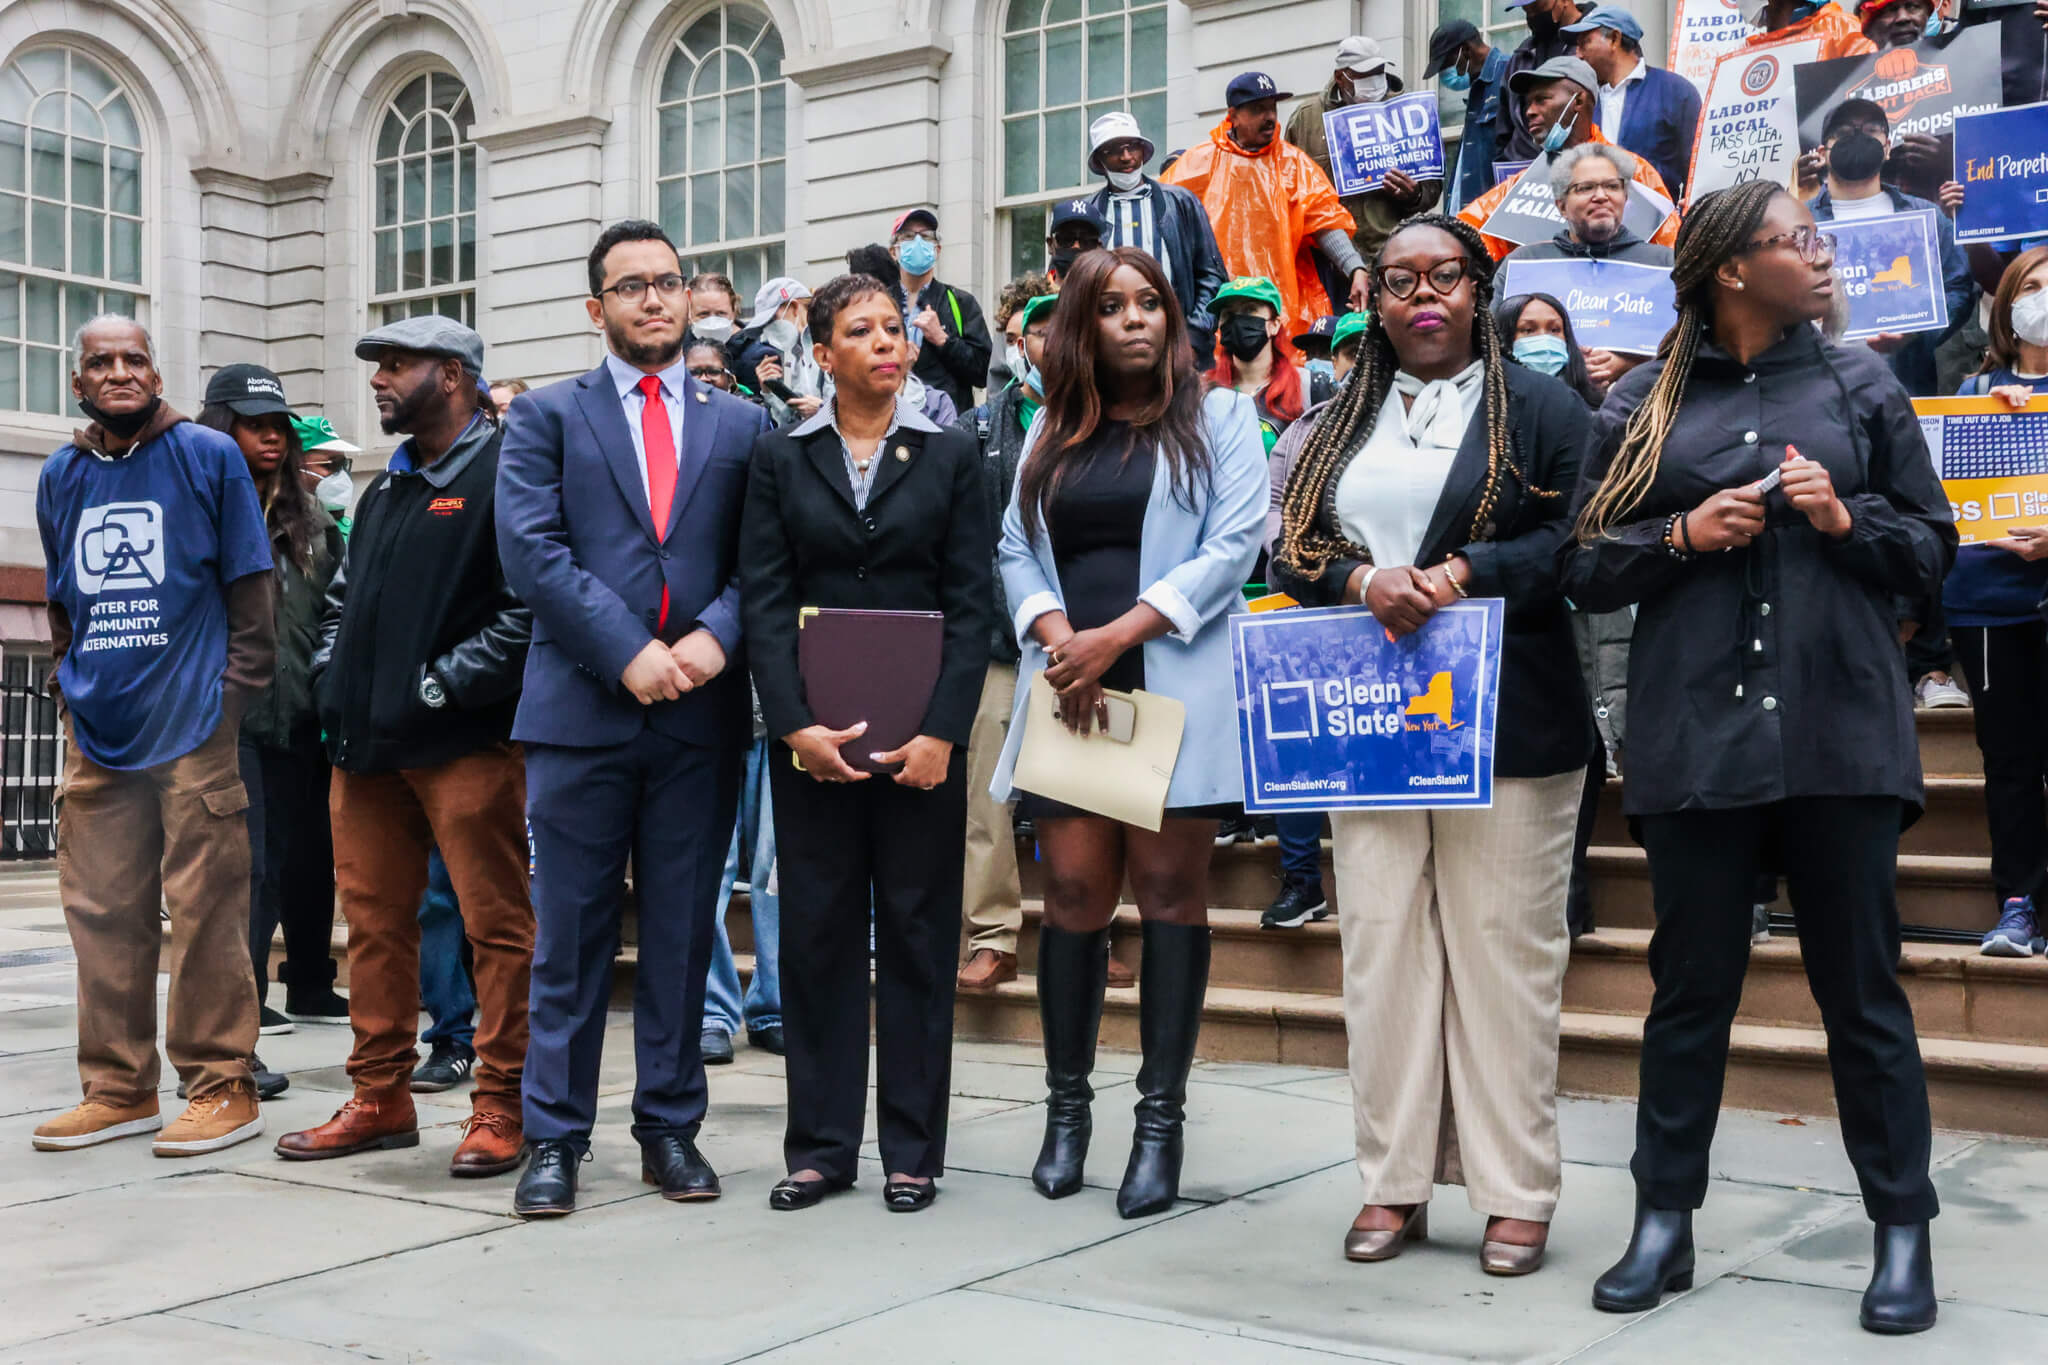 Clean Slate Coalition joins New York City pols to pass the Clean Slate